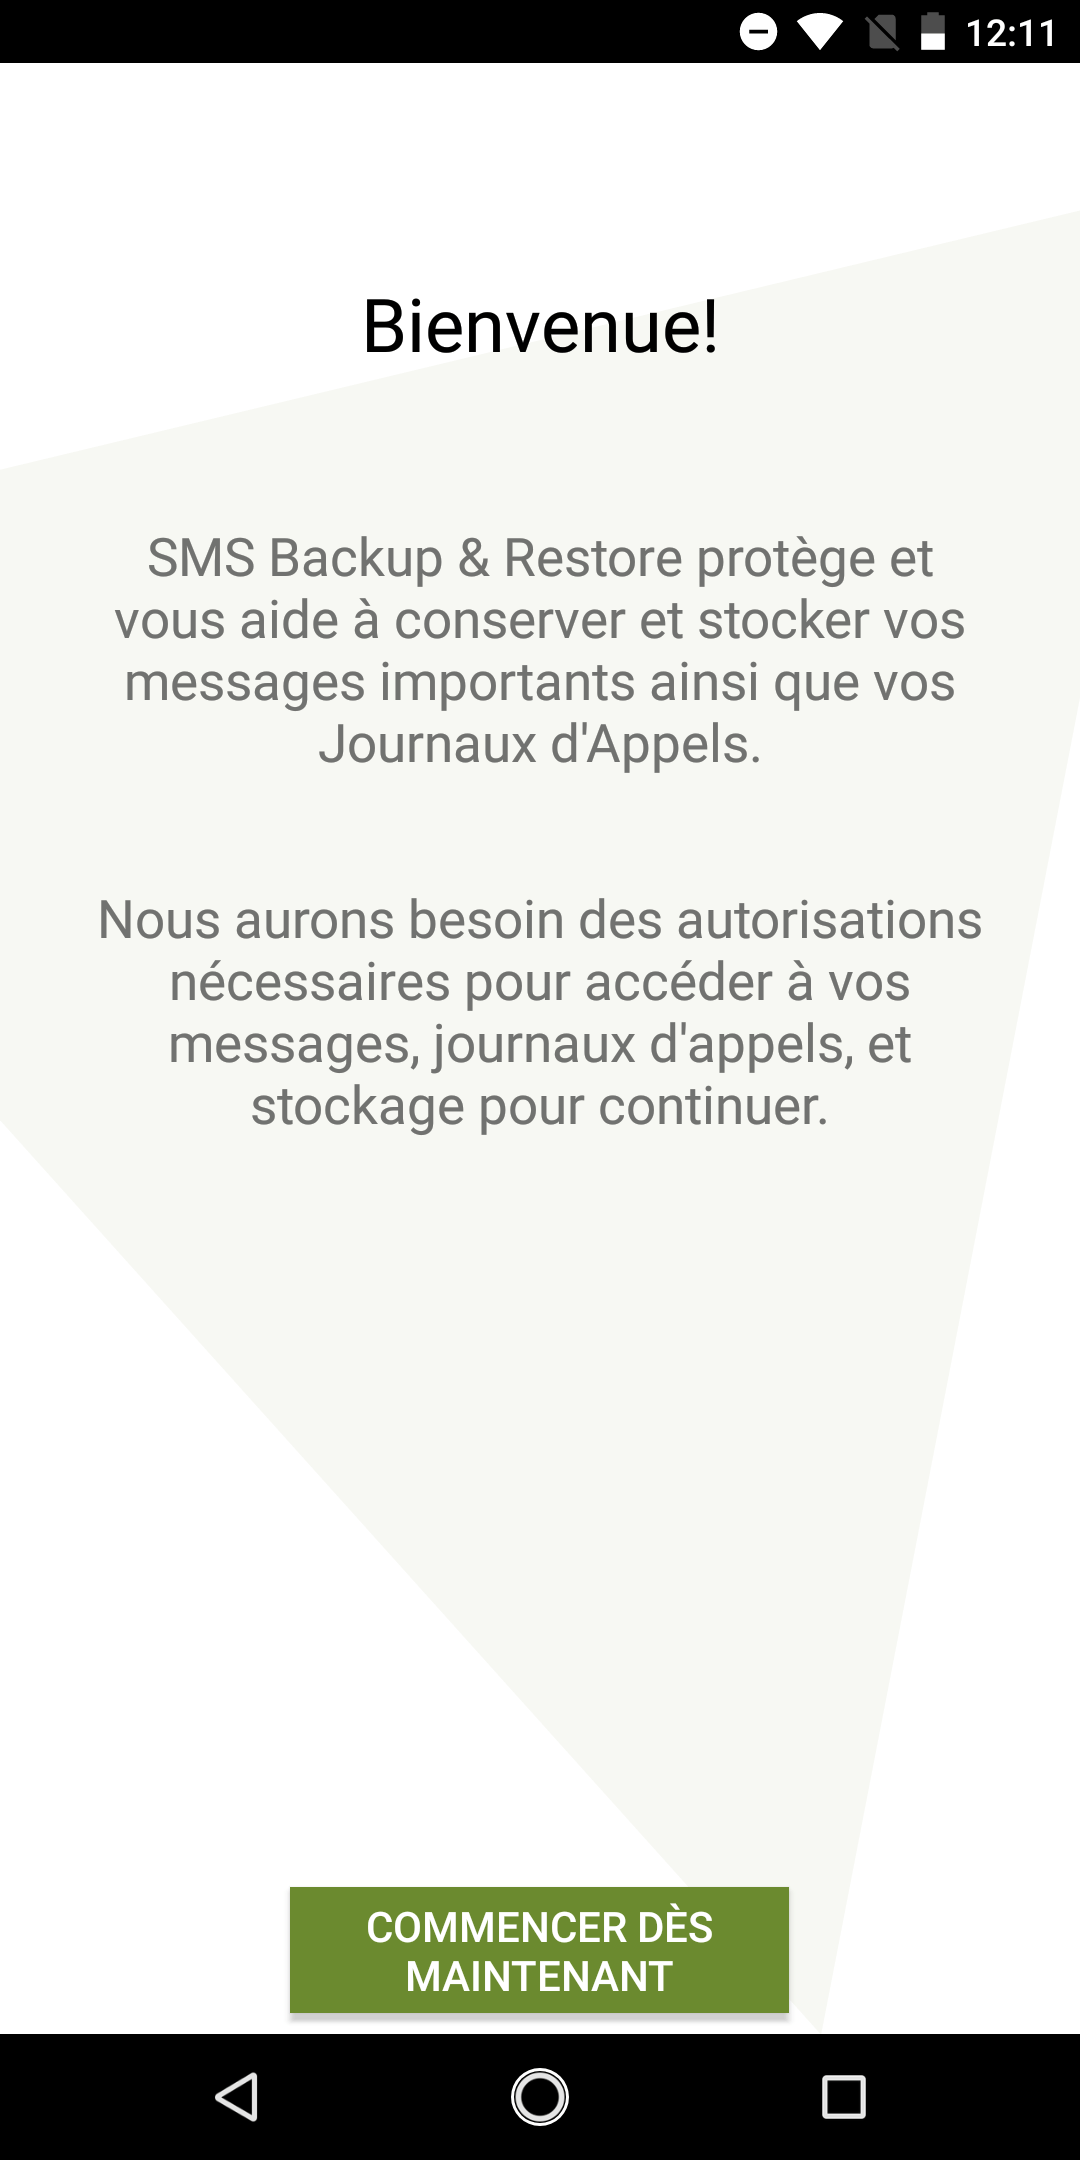 SMS Backup and restore (2)